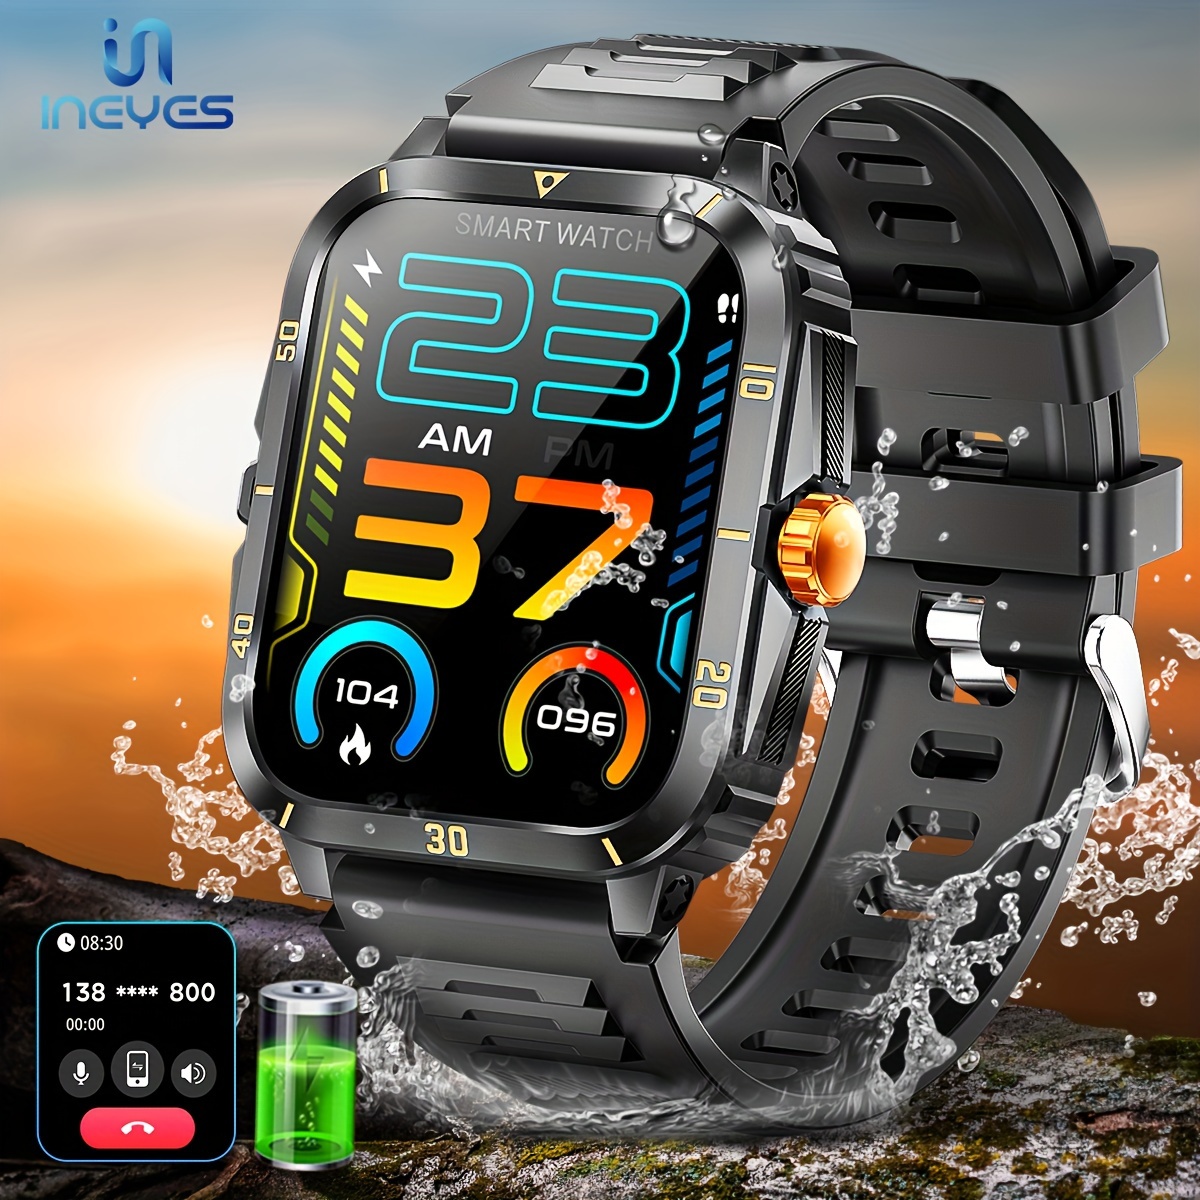 Great solution for GPS sports watches